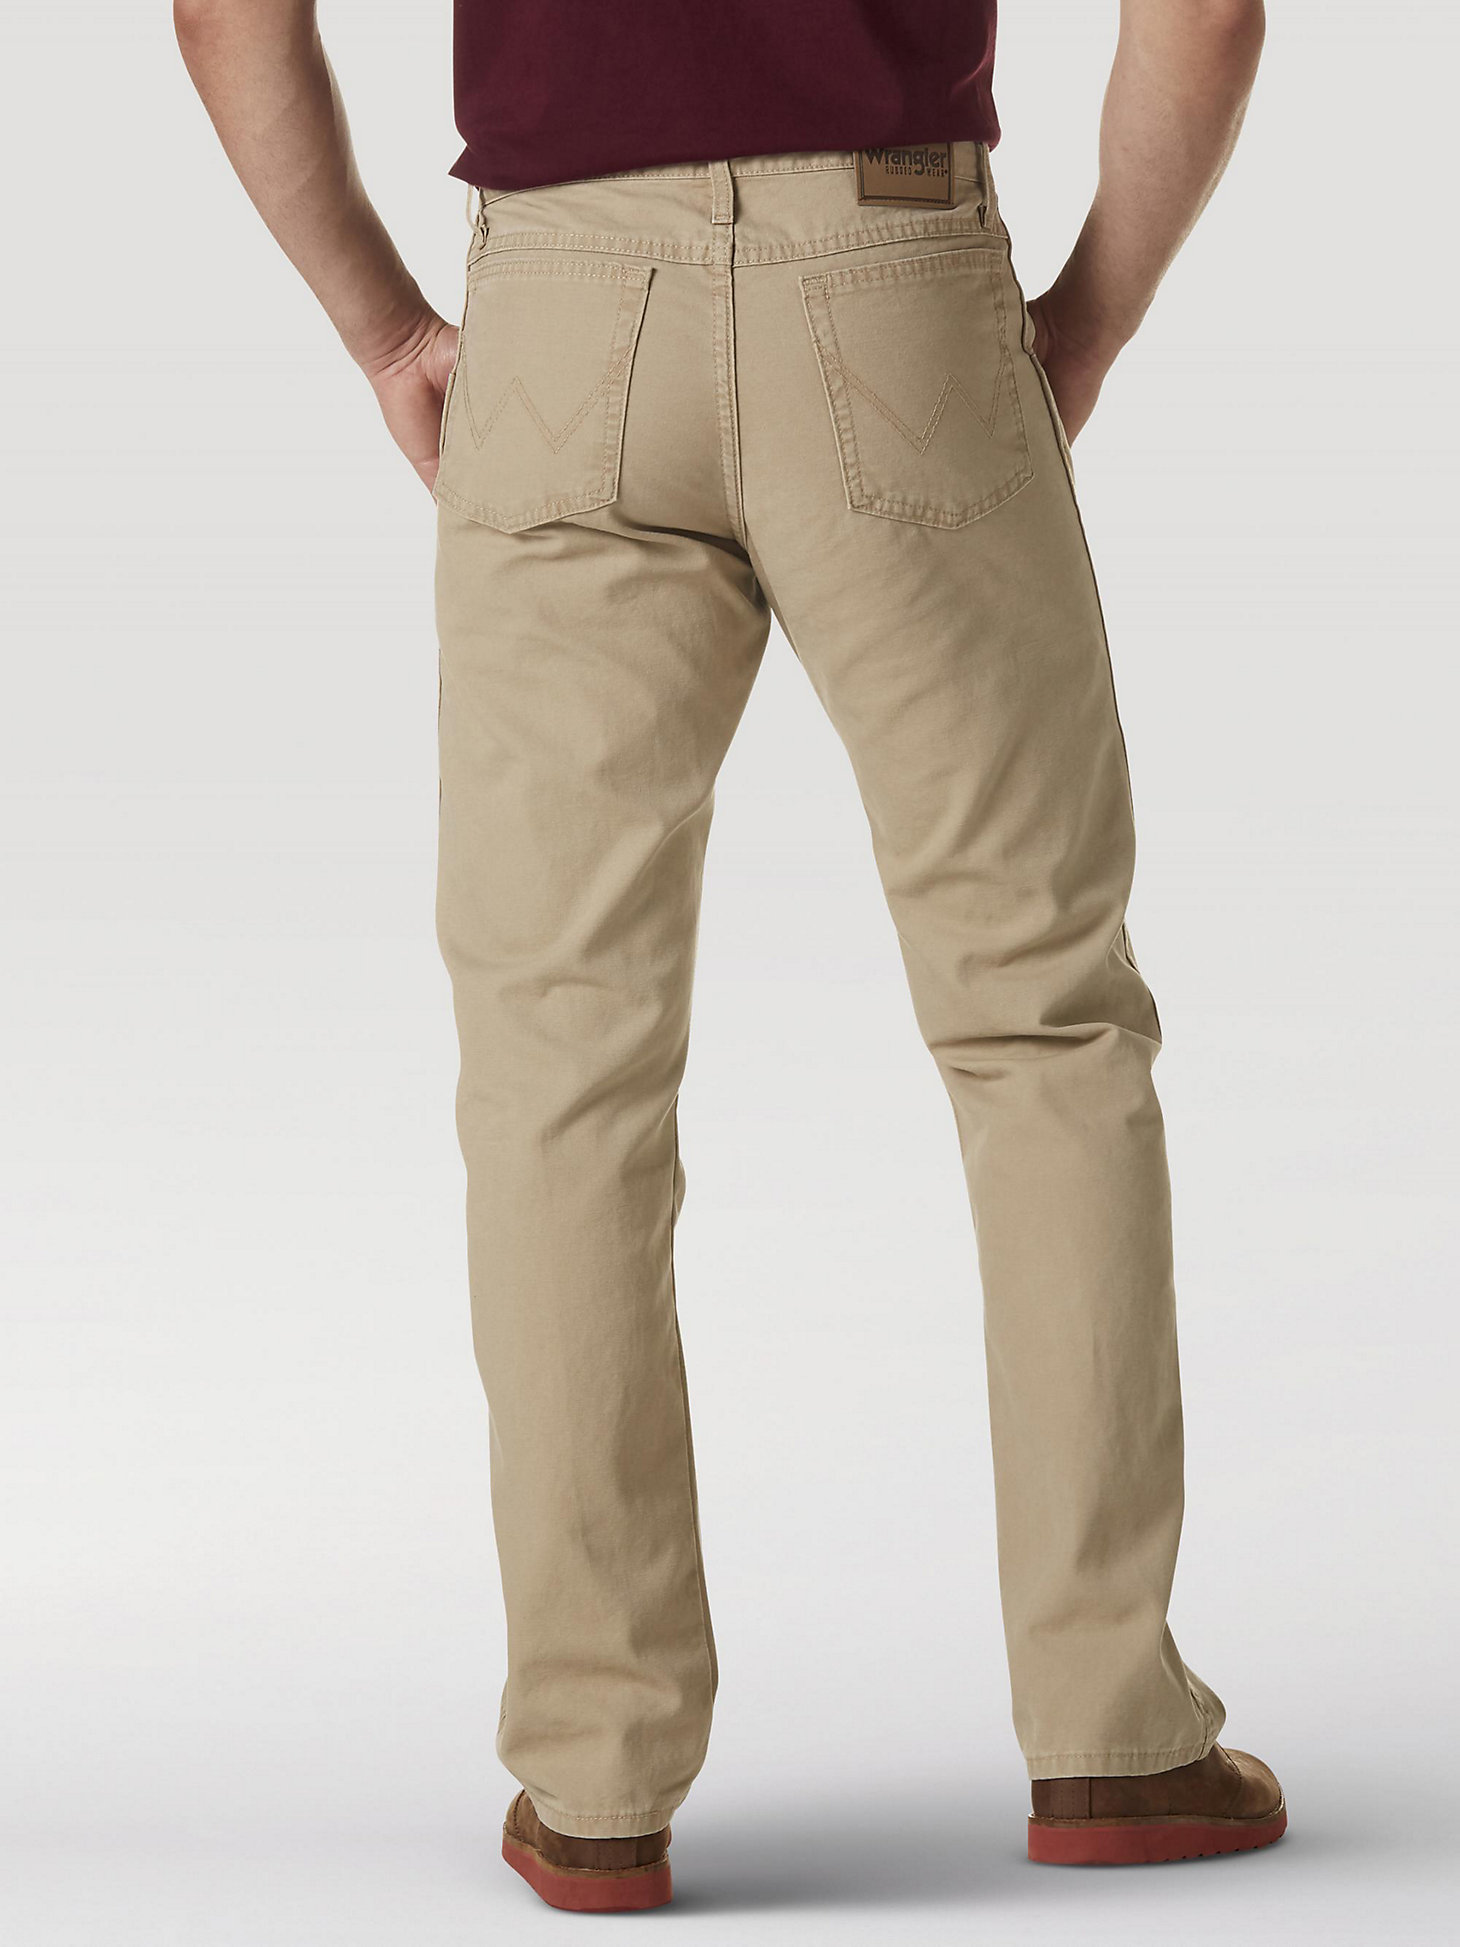 Wrangler Rugged Wear® Relaxed Fit Mid Rise Jean in Golden Khaki alternative view 2